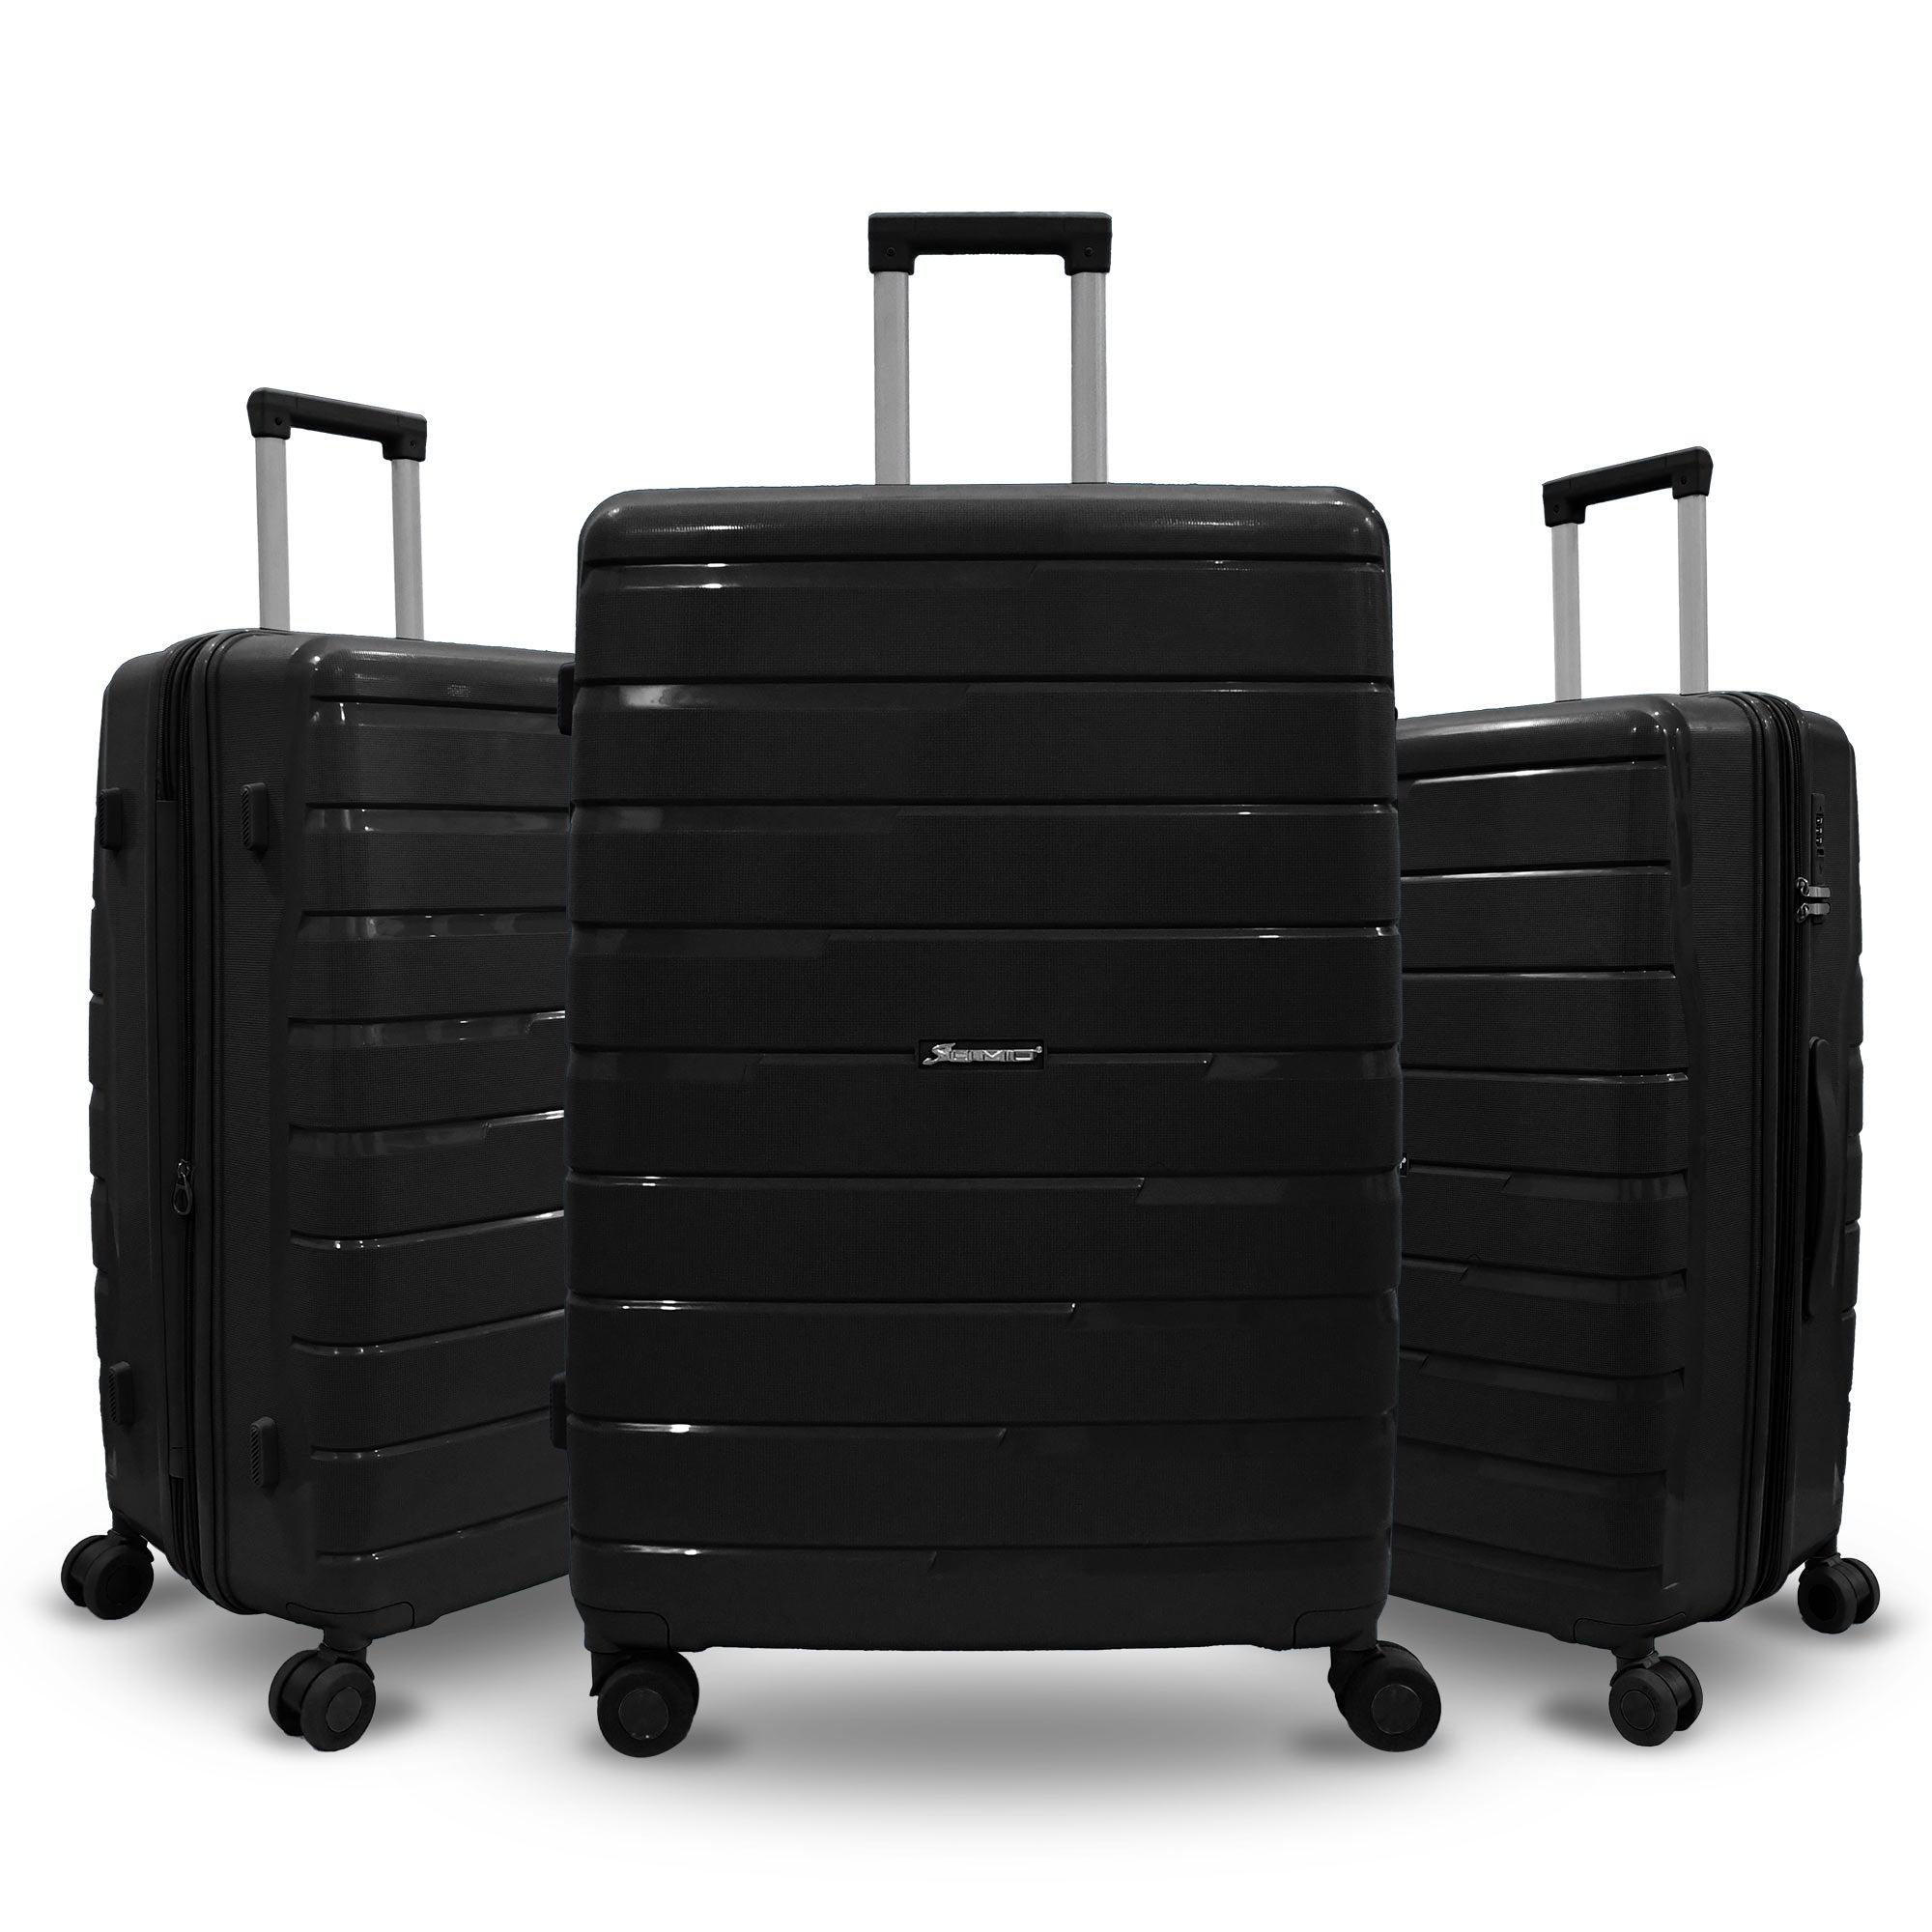 SUMO AIRLITE 360° EXPANDABLE PP LUGGAGE 3PC SET 21/25/29"